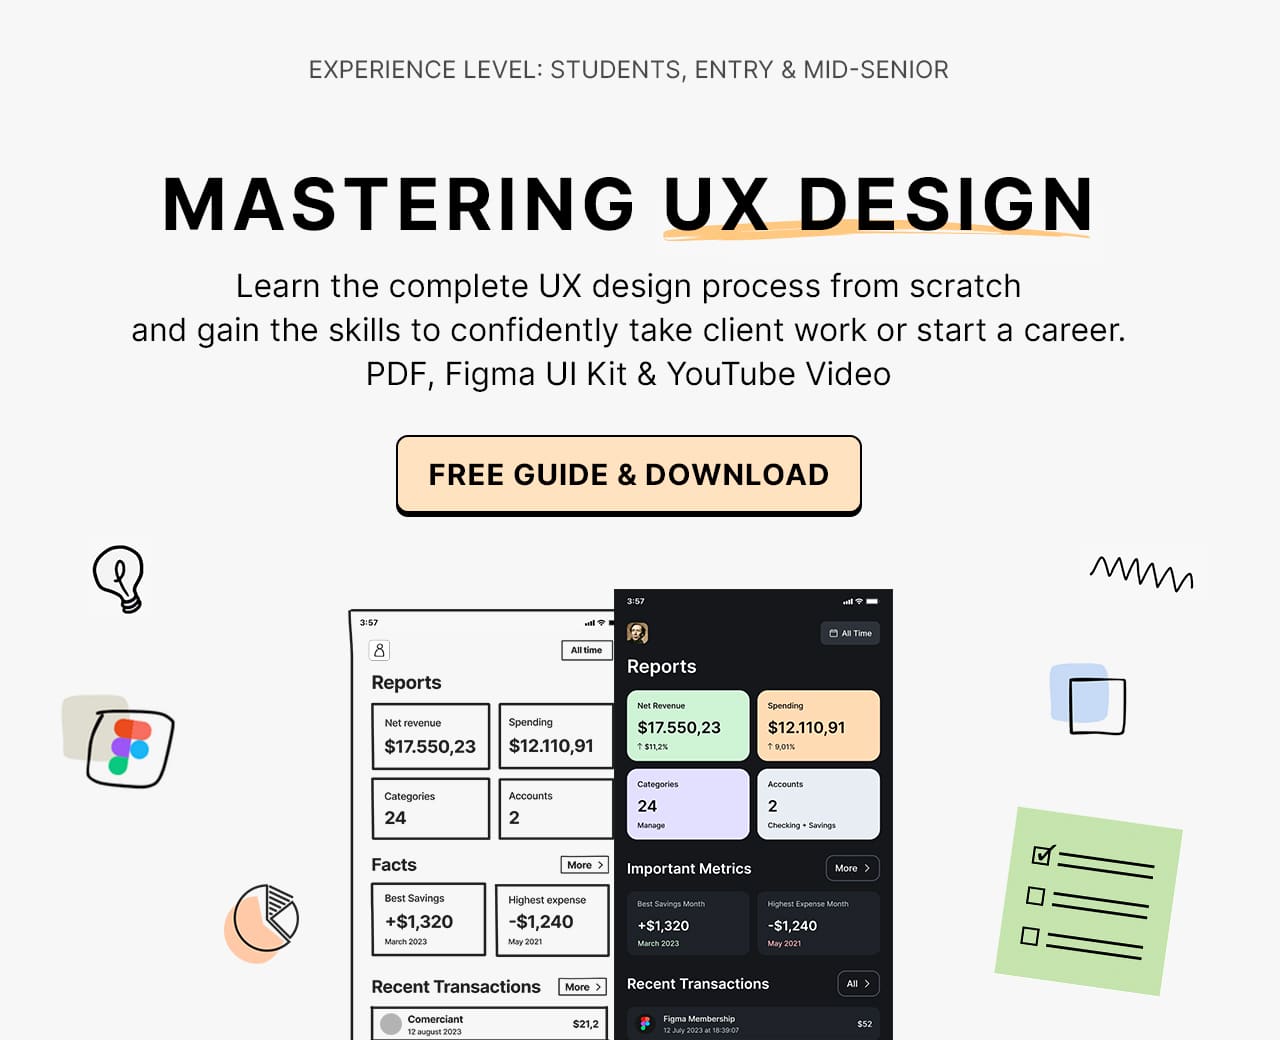 Mastering UX Design - A free practical guide. From Empathise, Define, Ideation, Prototype to Testing. A mobile app design case study